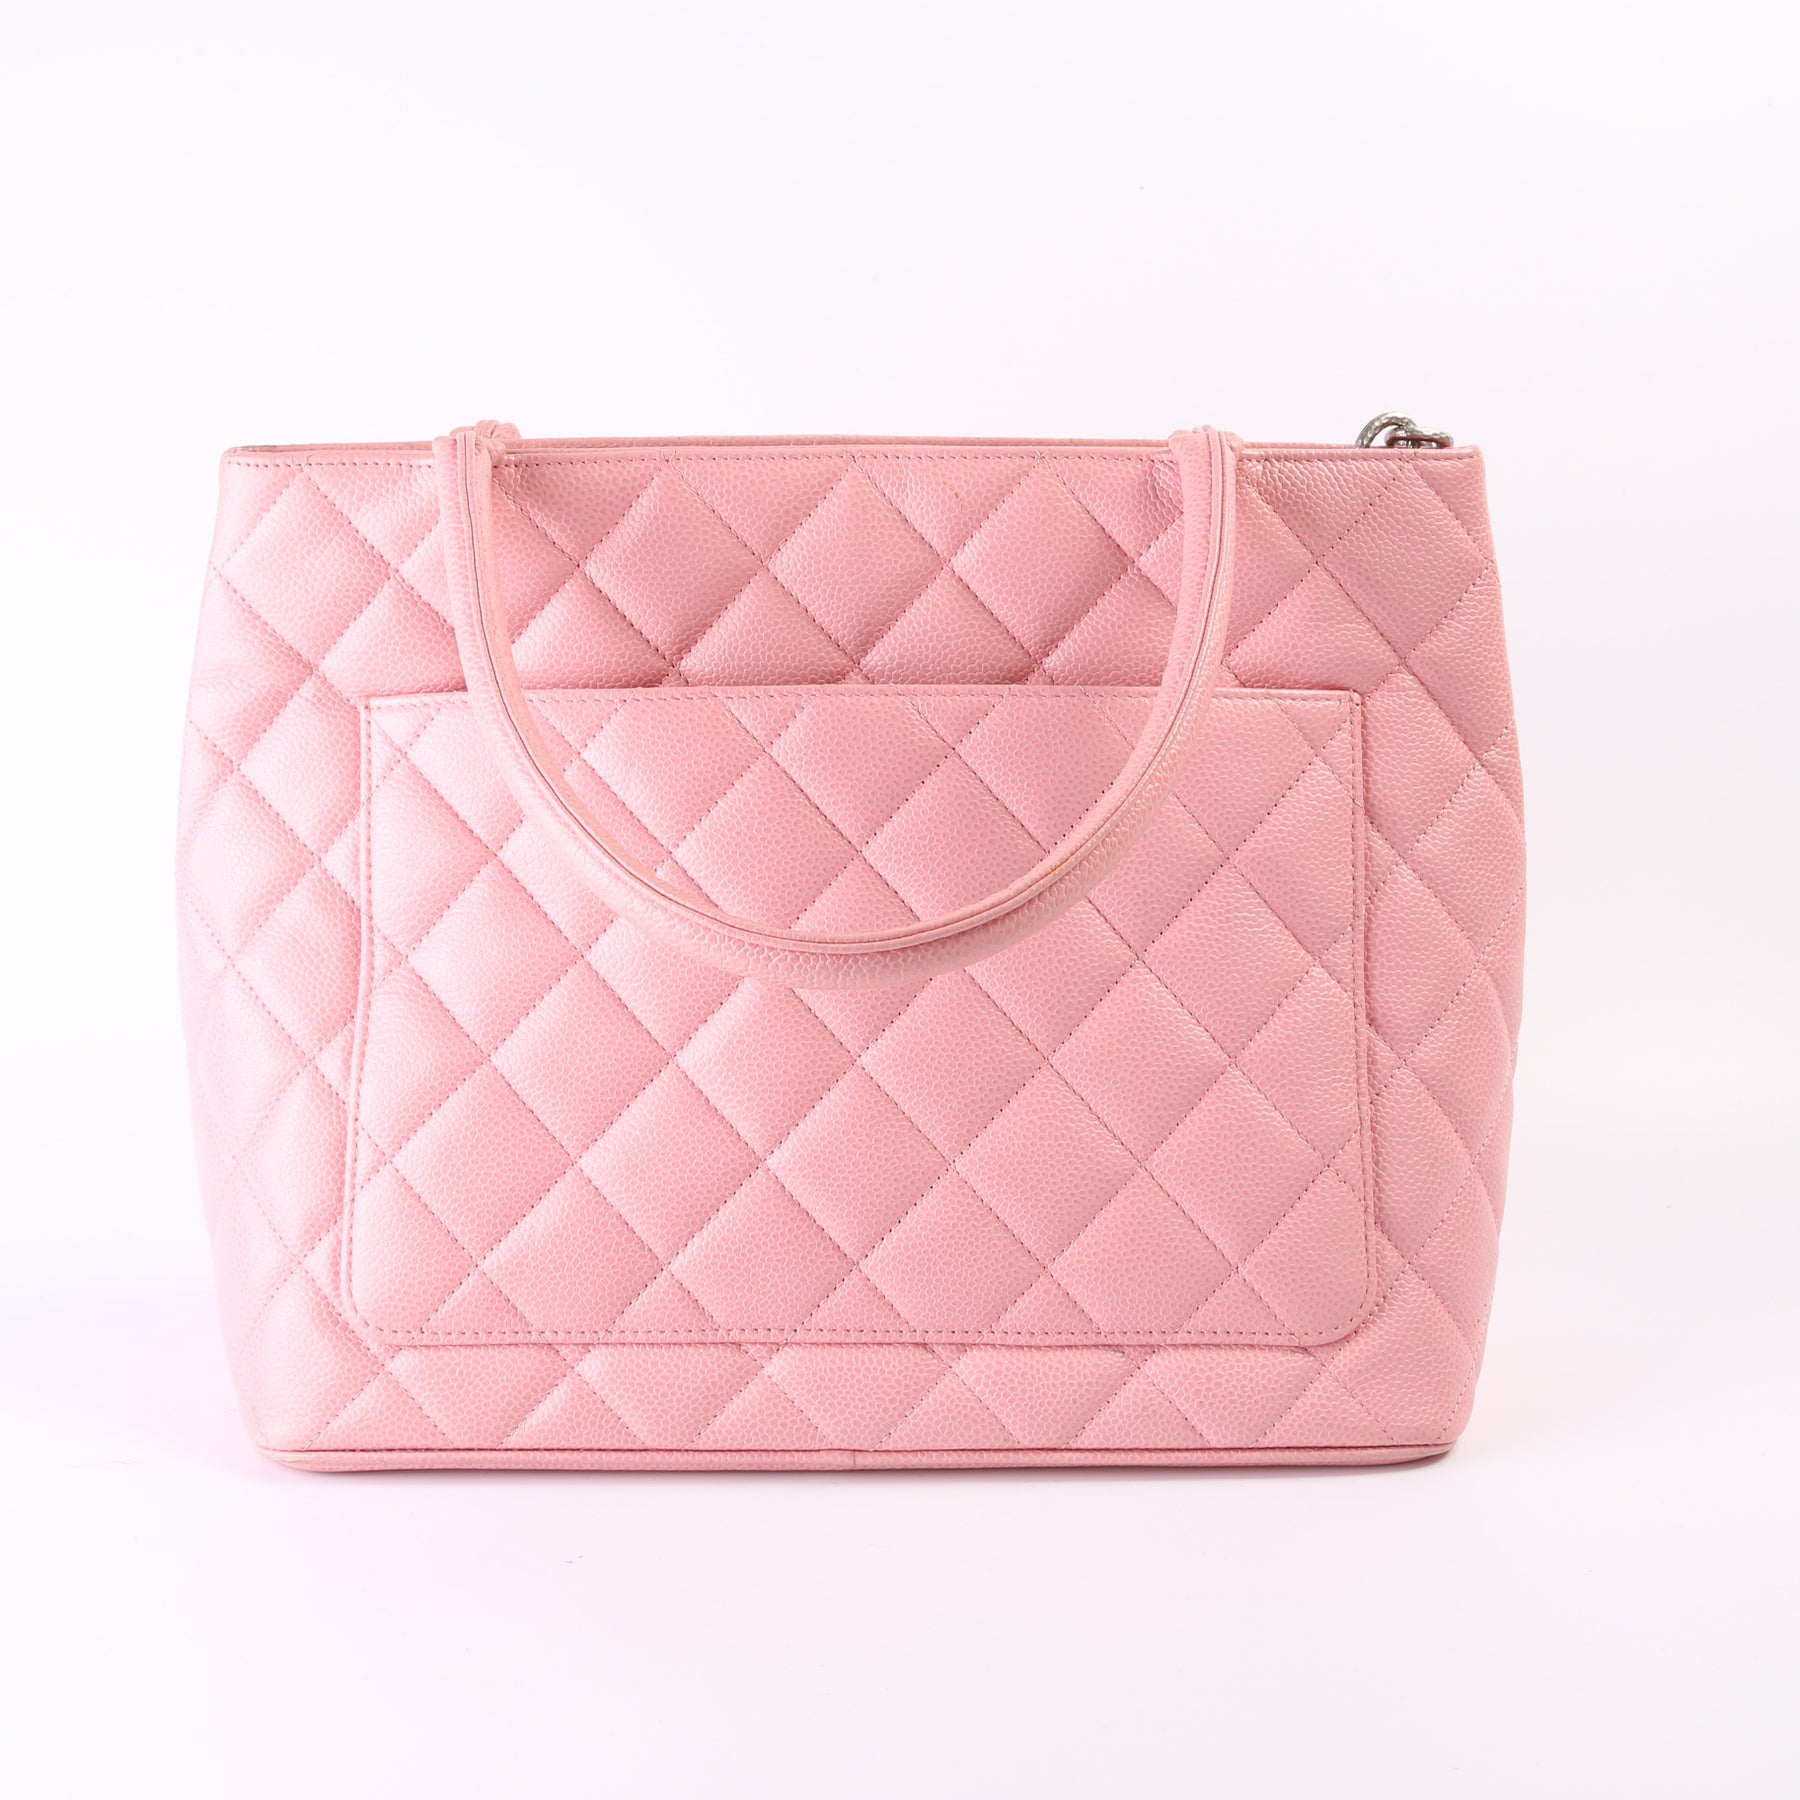 Chanel Medallion Tote Pink